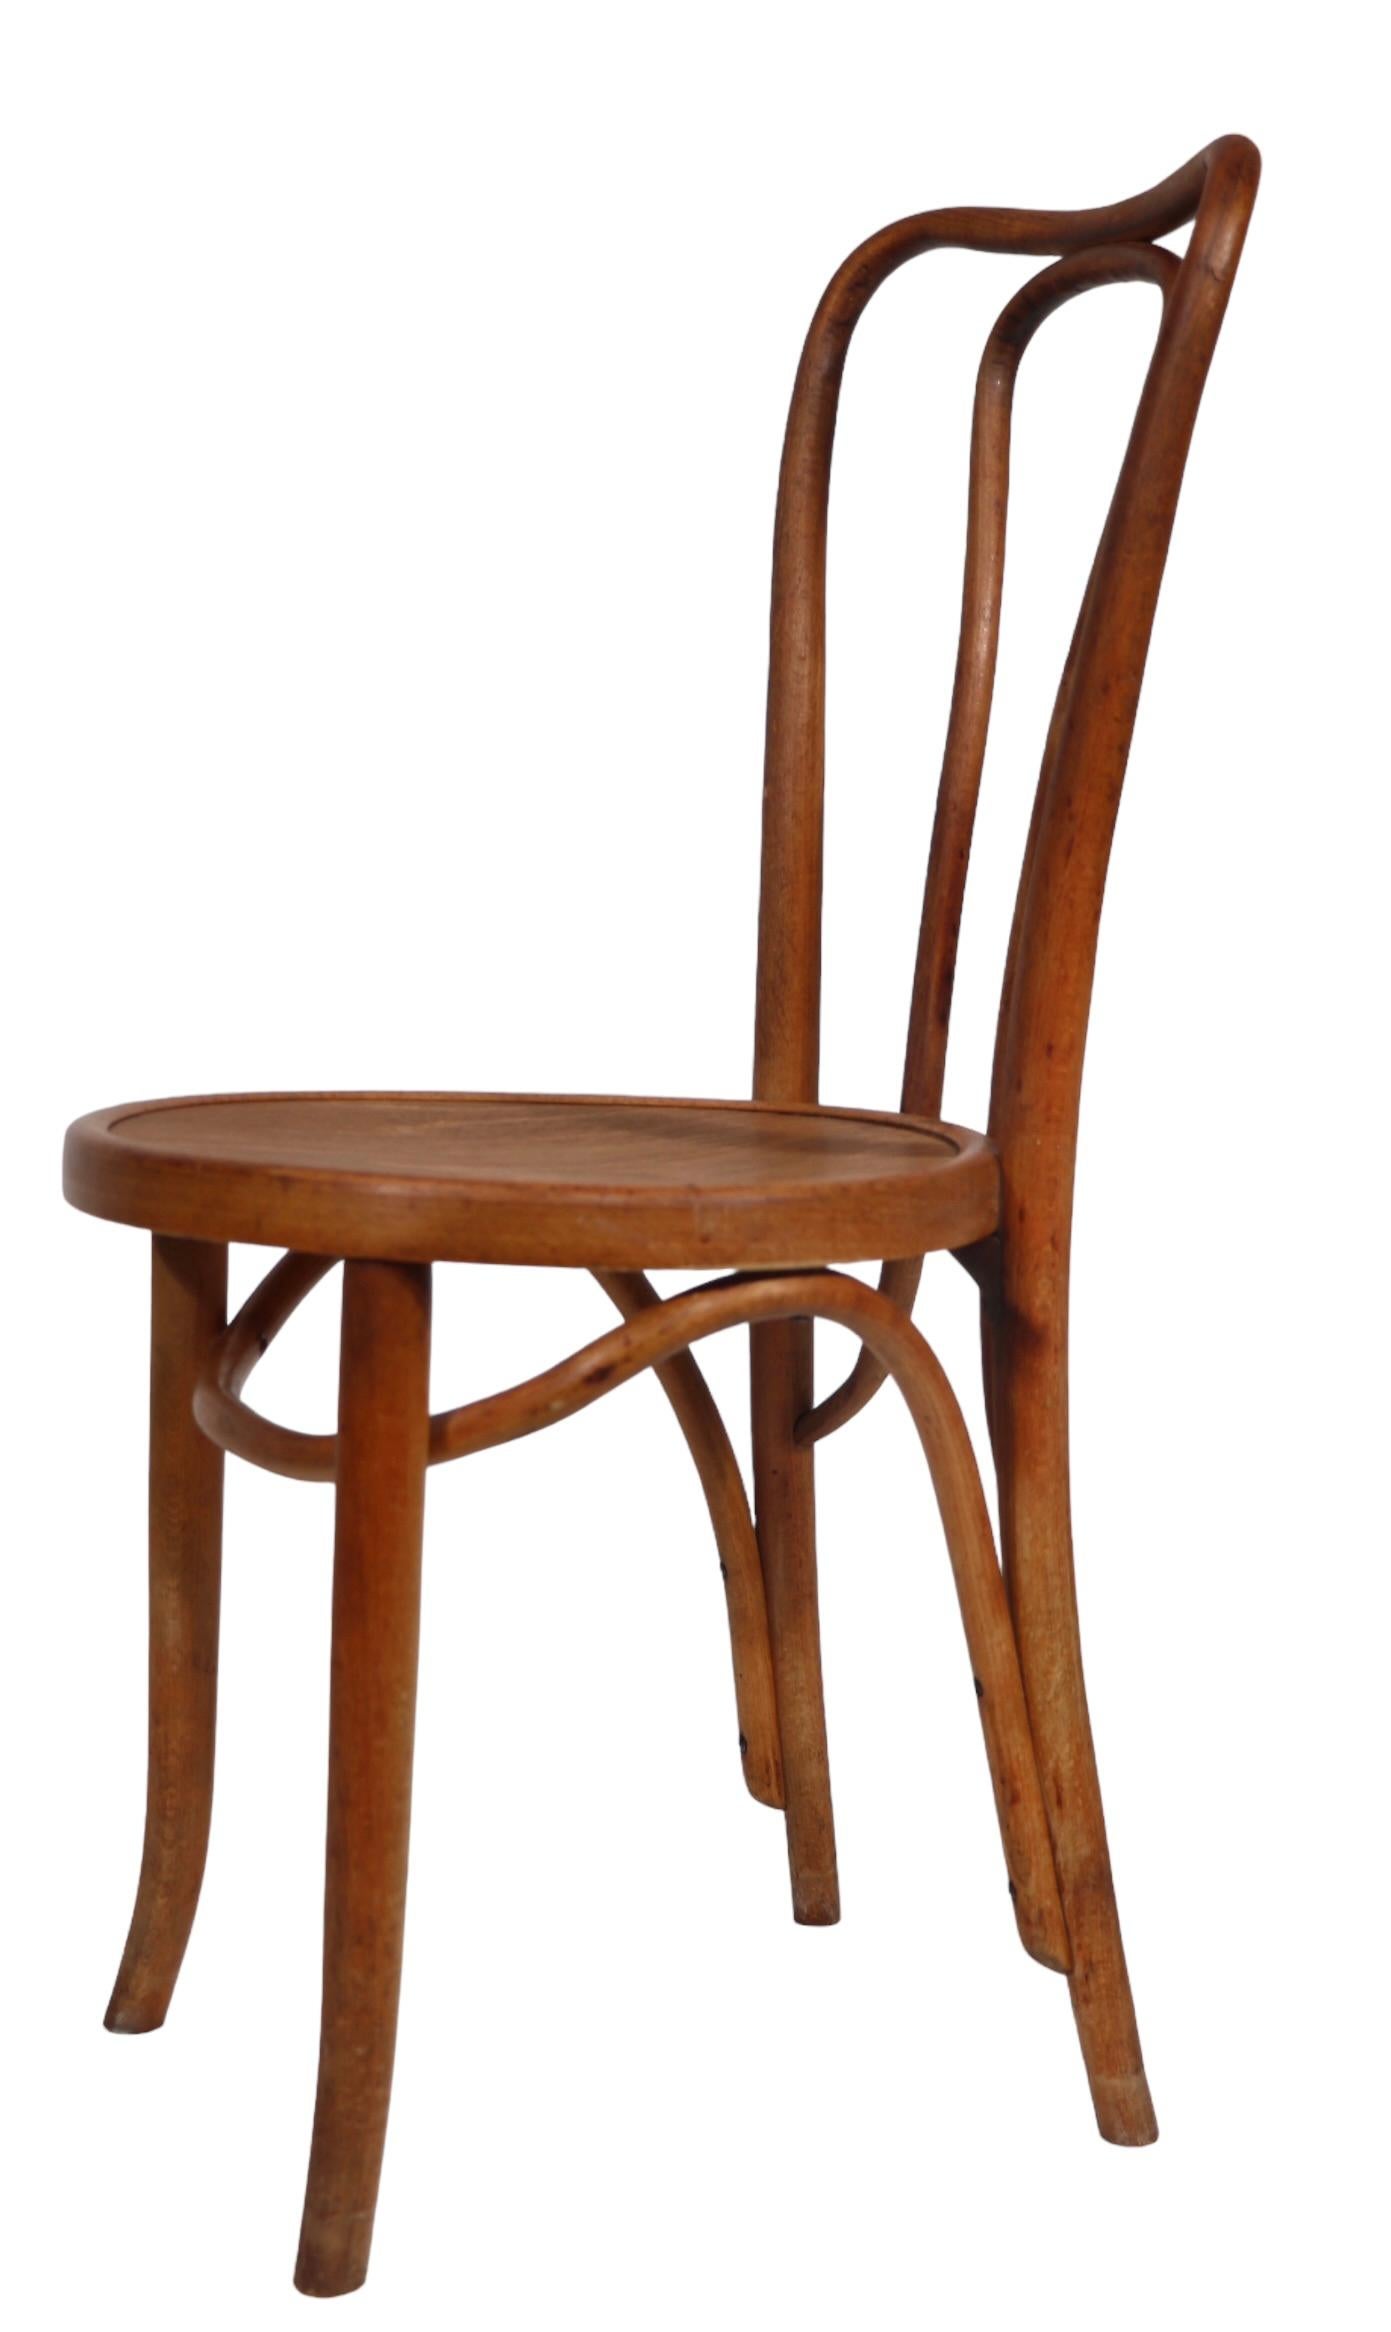 Vienna Secessionist Bentwood Chairs att. to Thonet  Made in Poland 3 available  8